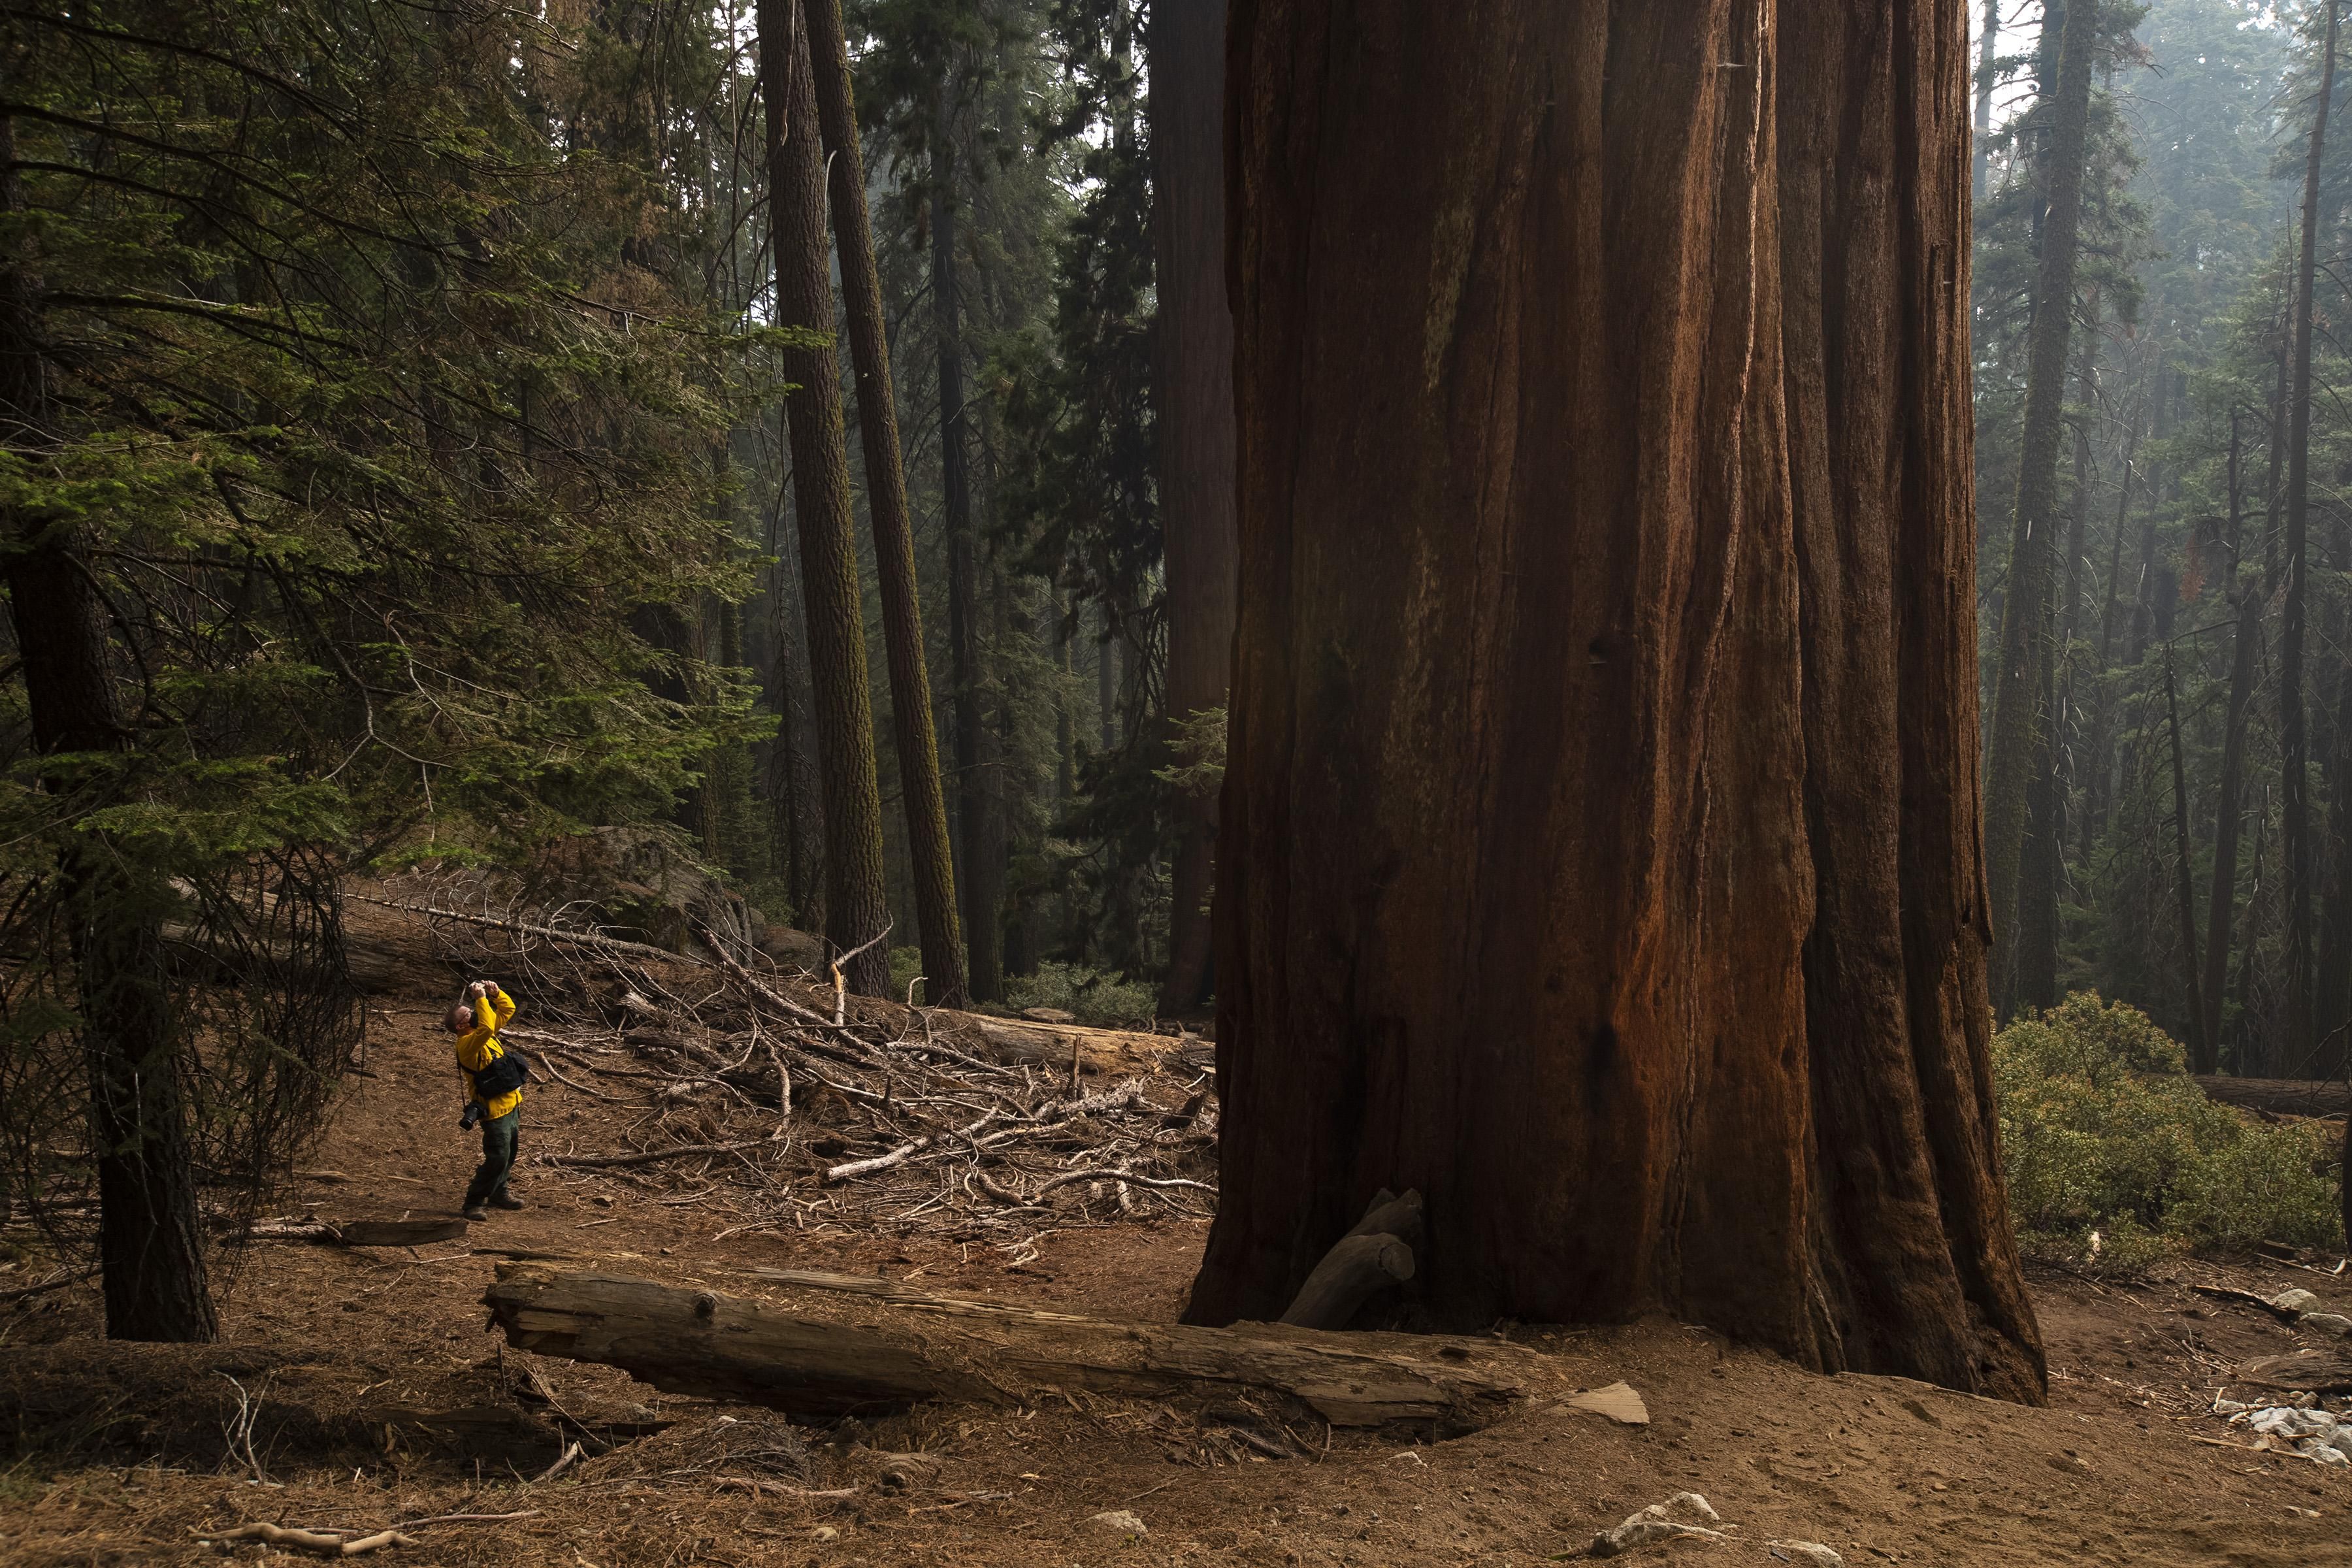 A news photographer is dwarfed by a giant sequoia in Lost Grove as smoke haze from the KNP Complex fire fills the air on September 17, 2021 in Sequoia National Park, California.